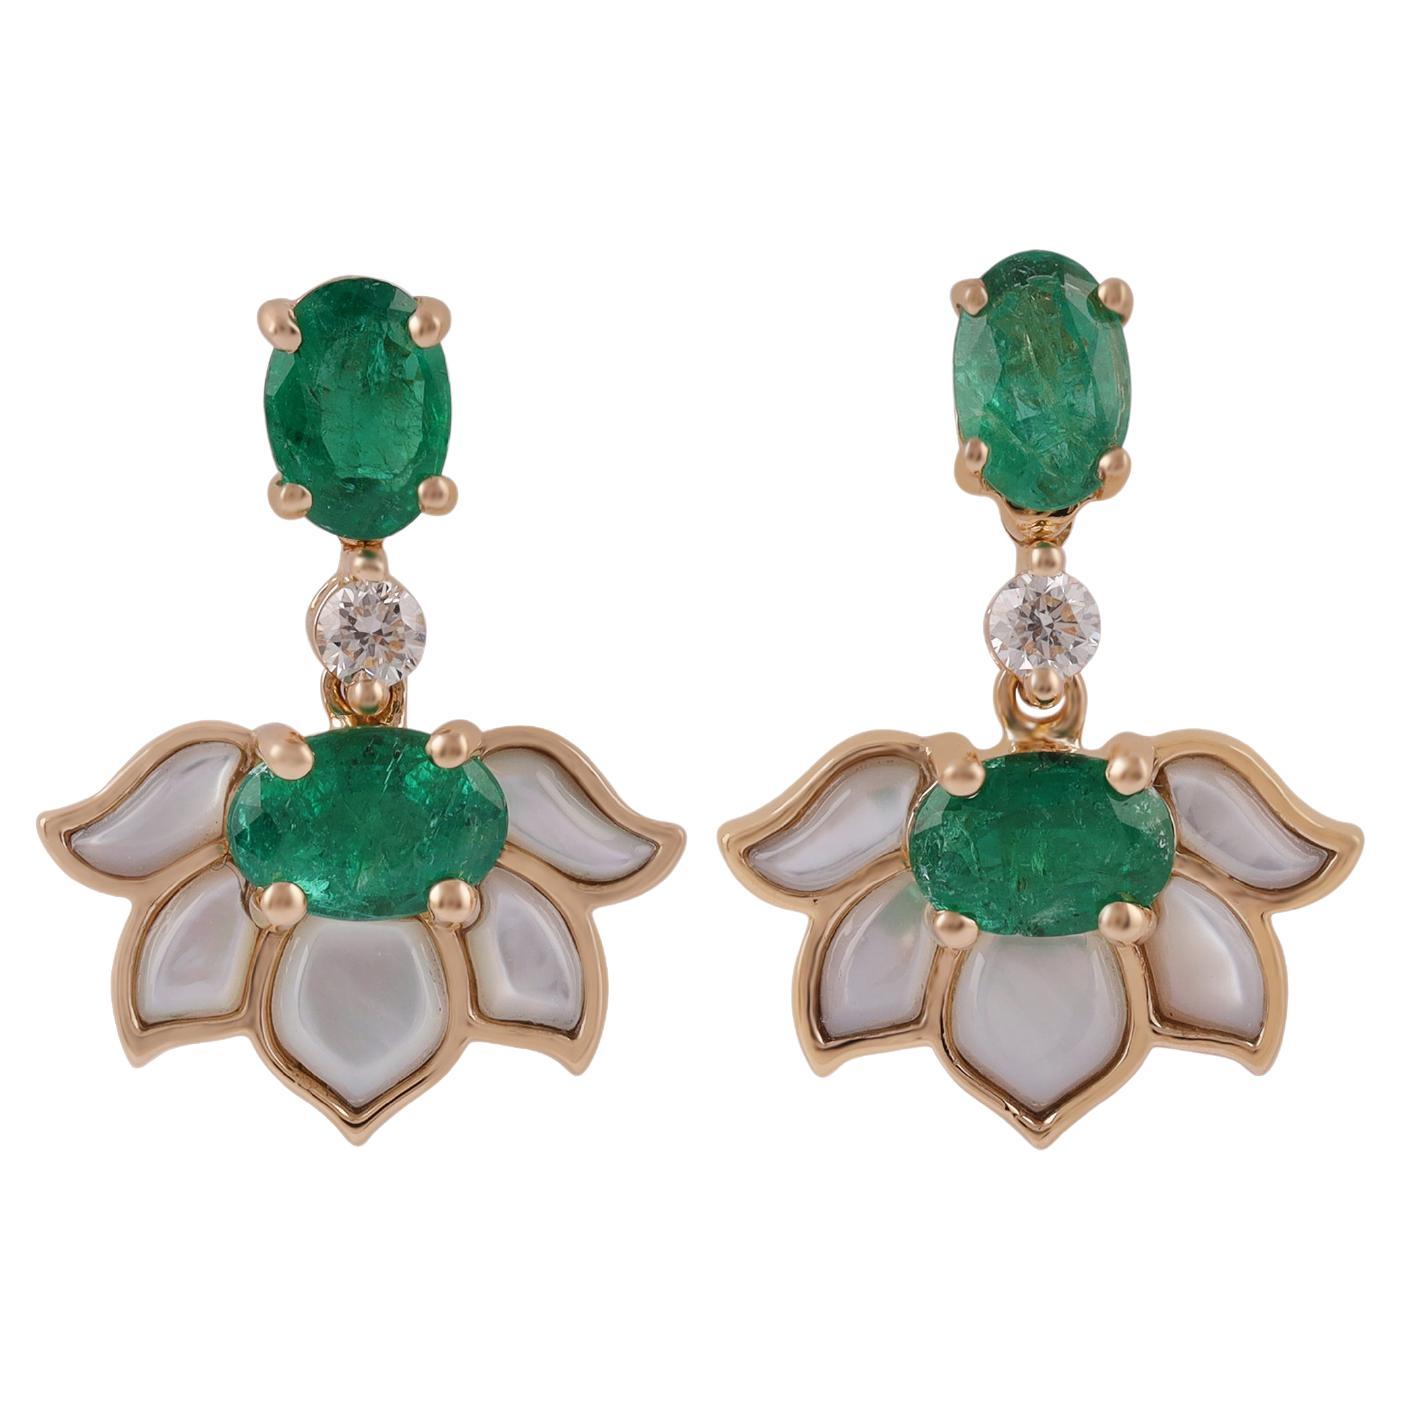 1.77 Carat Emerald, Mother of Pearl & Round Diamonds Earrings in 18k Yellow Gold